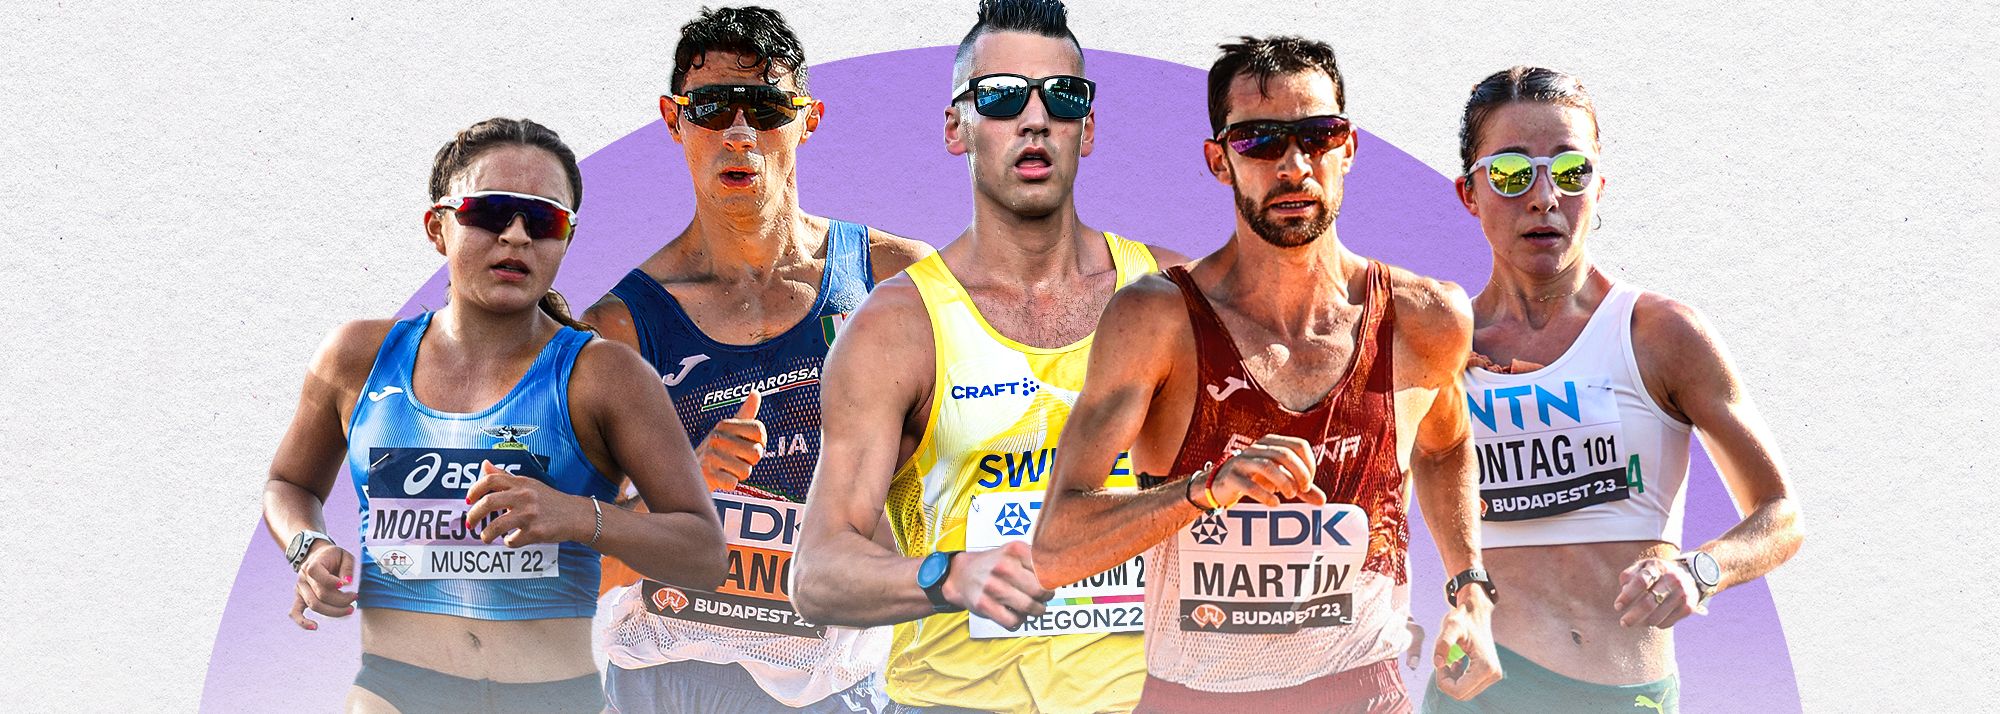 Details on how to watch and follow the World Race Walking Team Championships